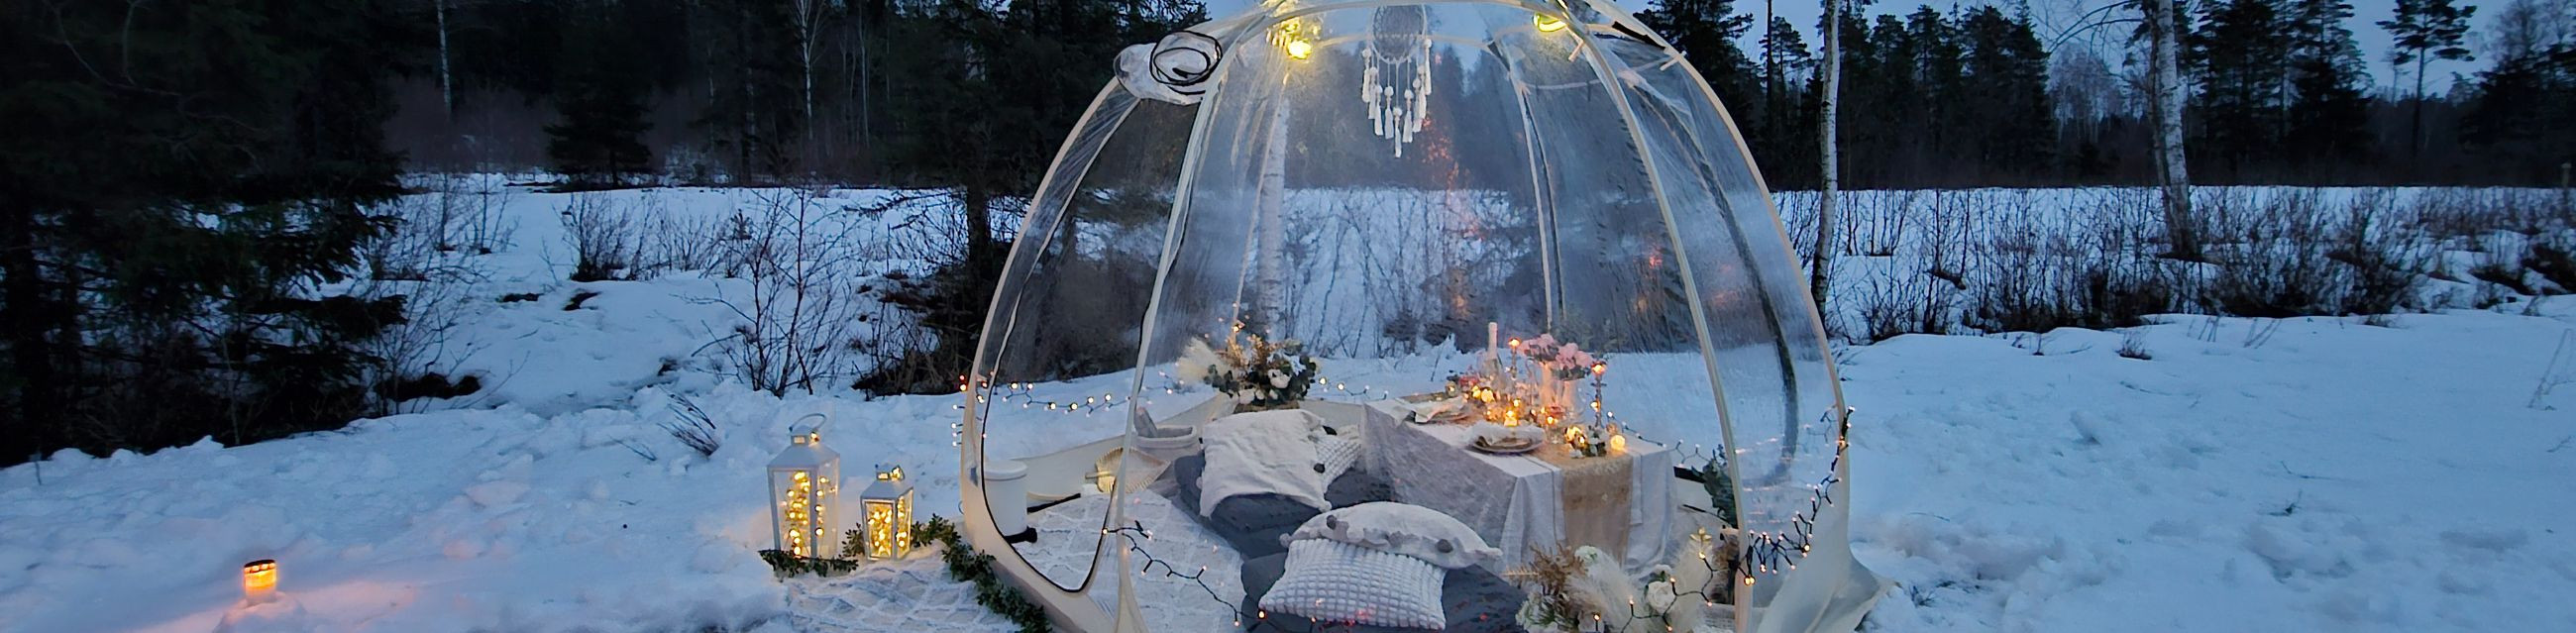 We specialize in curating high-end picnic experiences and providing unique bubble tent accommodations.